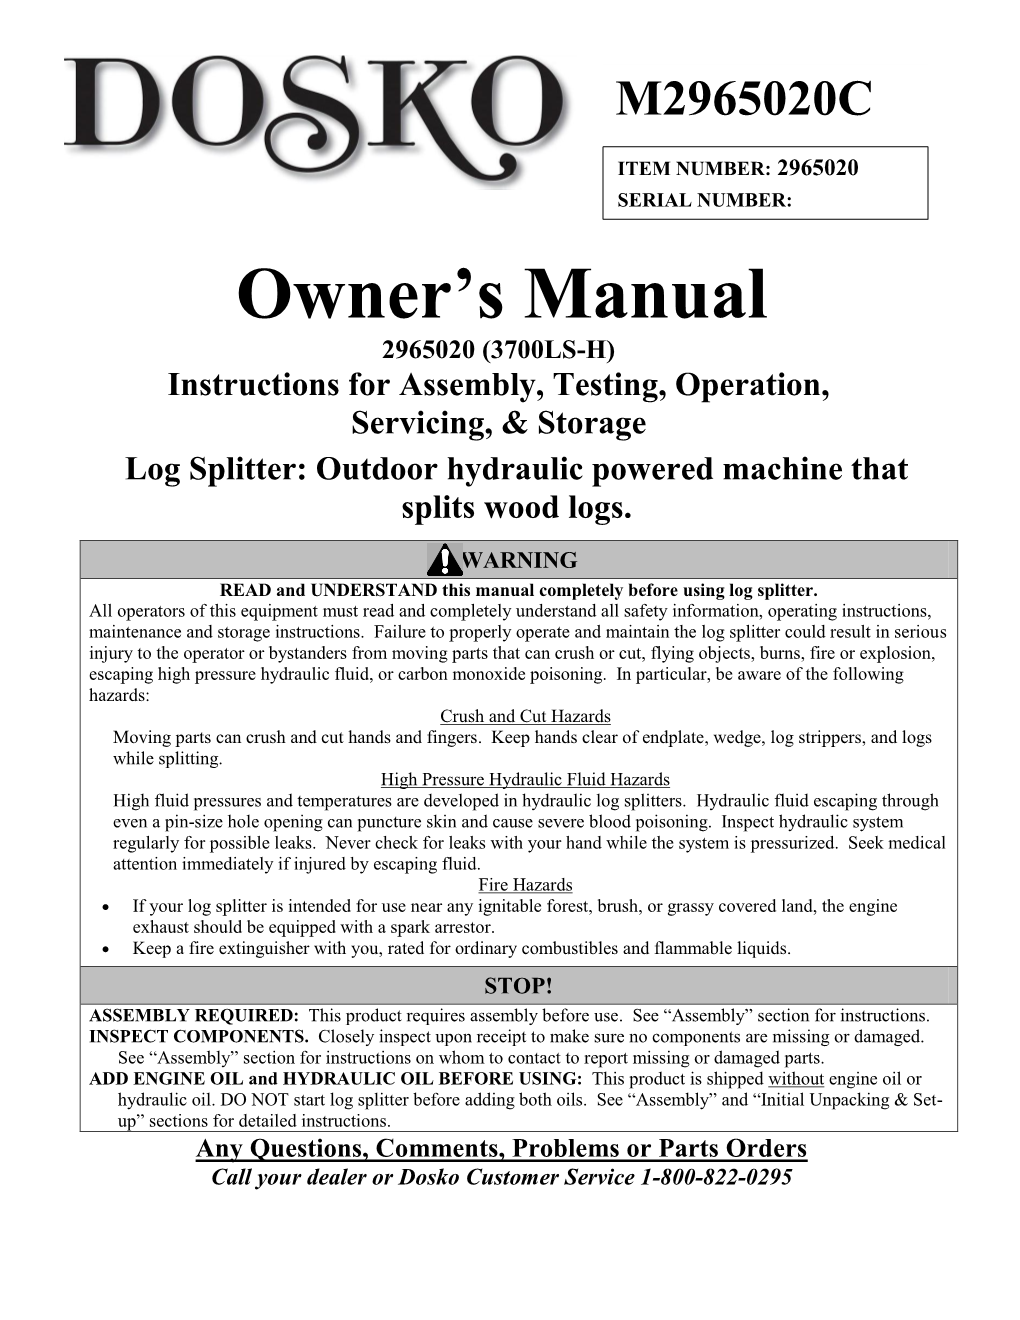 Owner's Manual Completely Before Attempting to Use the Log Splitter